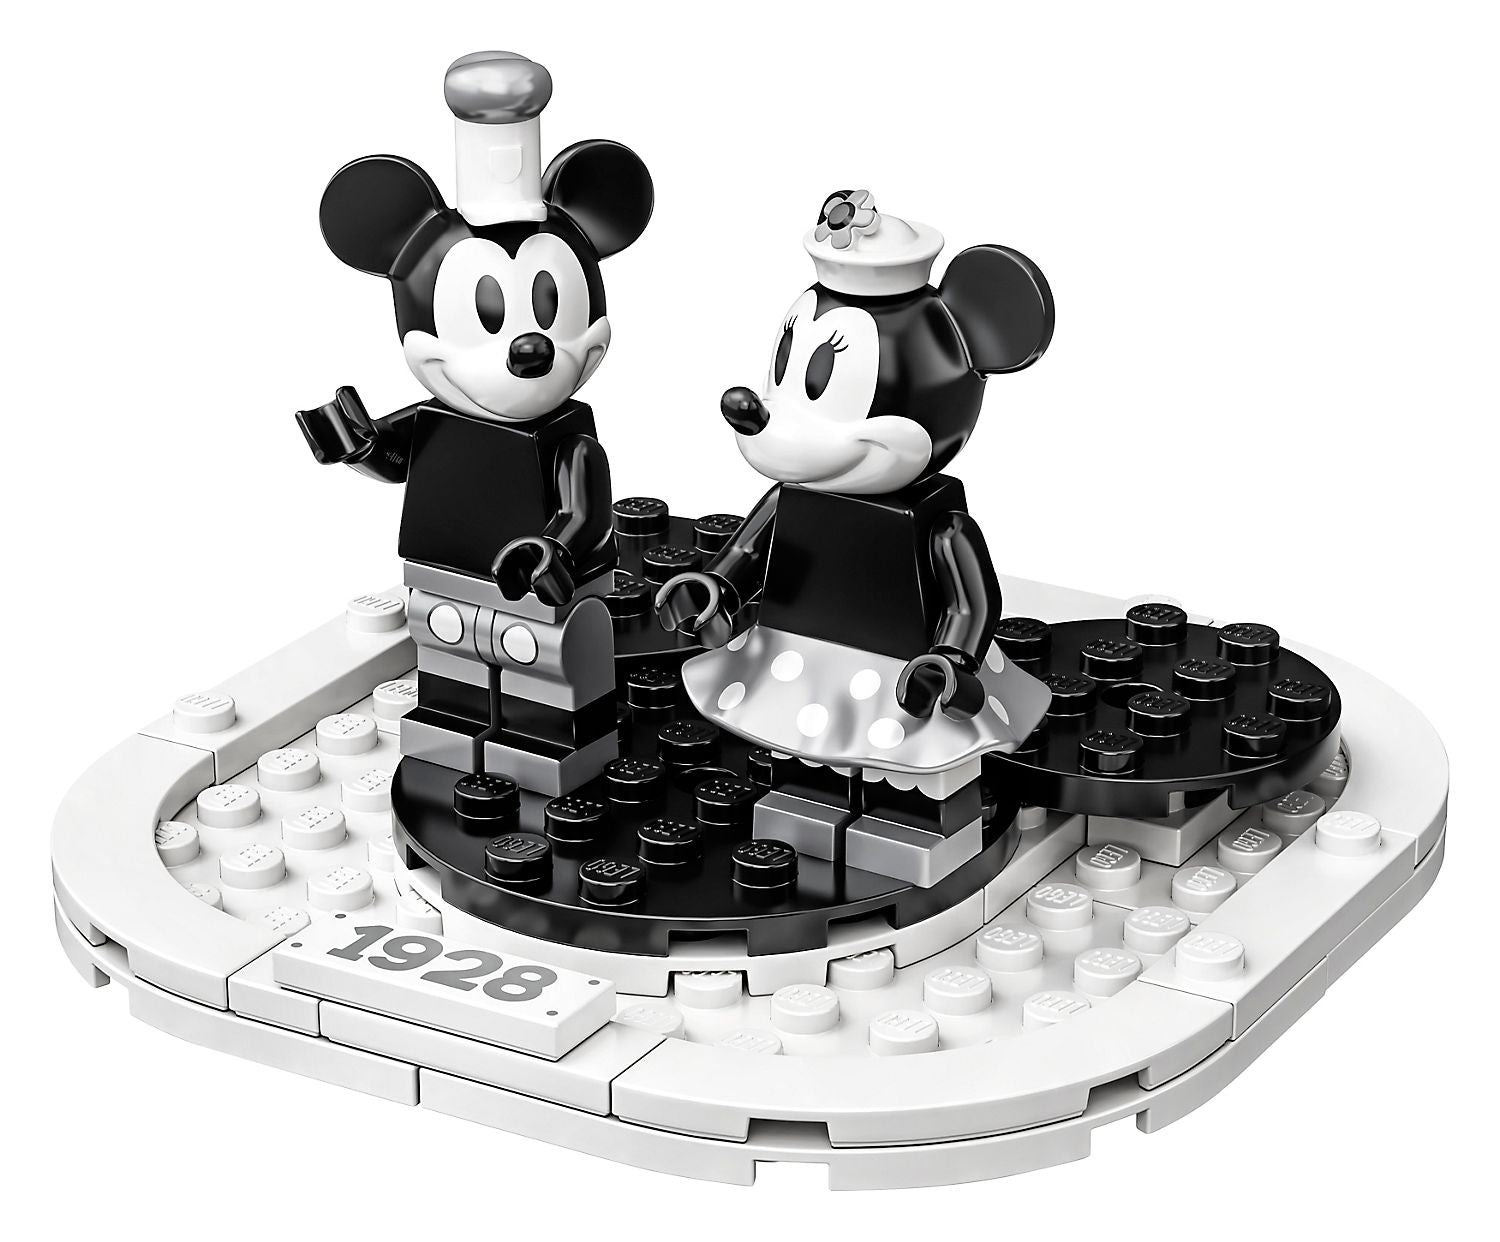 LEGO Ideas: Mickey Mouse Steamboat Willie - 21317